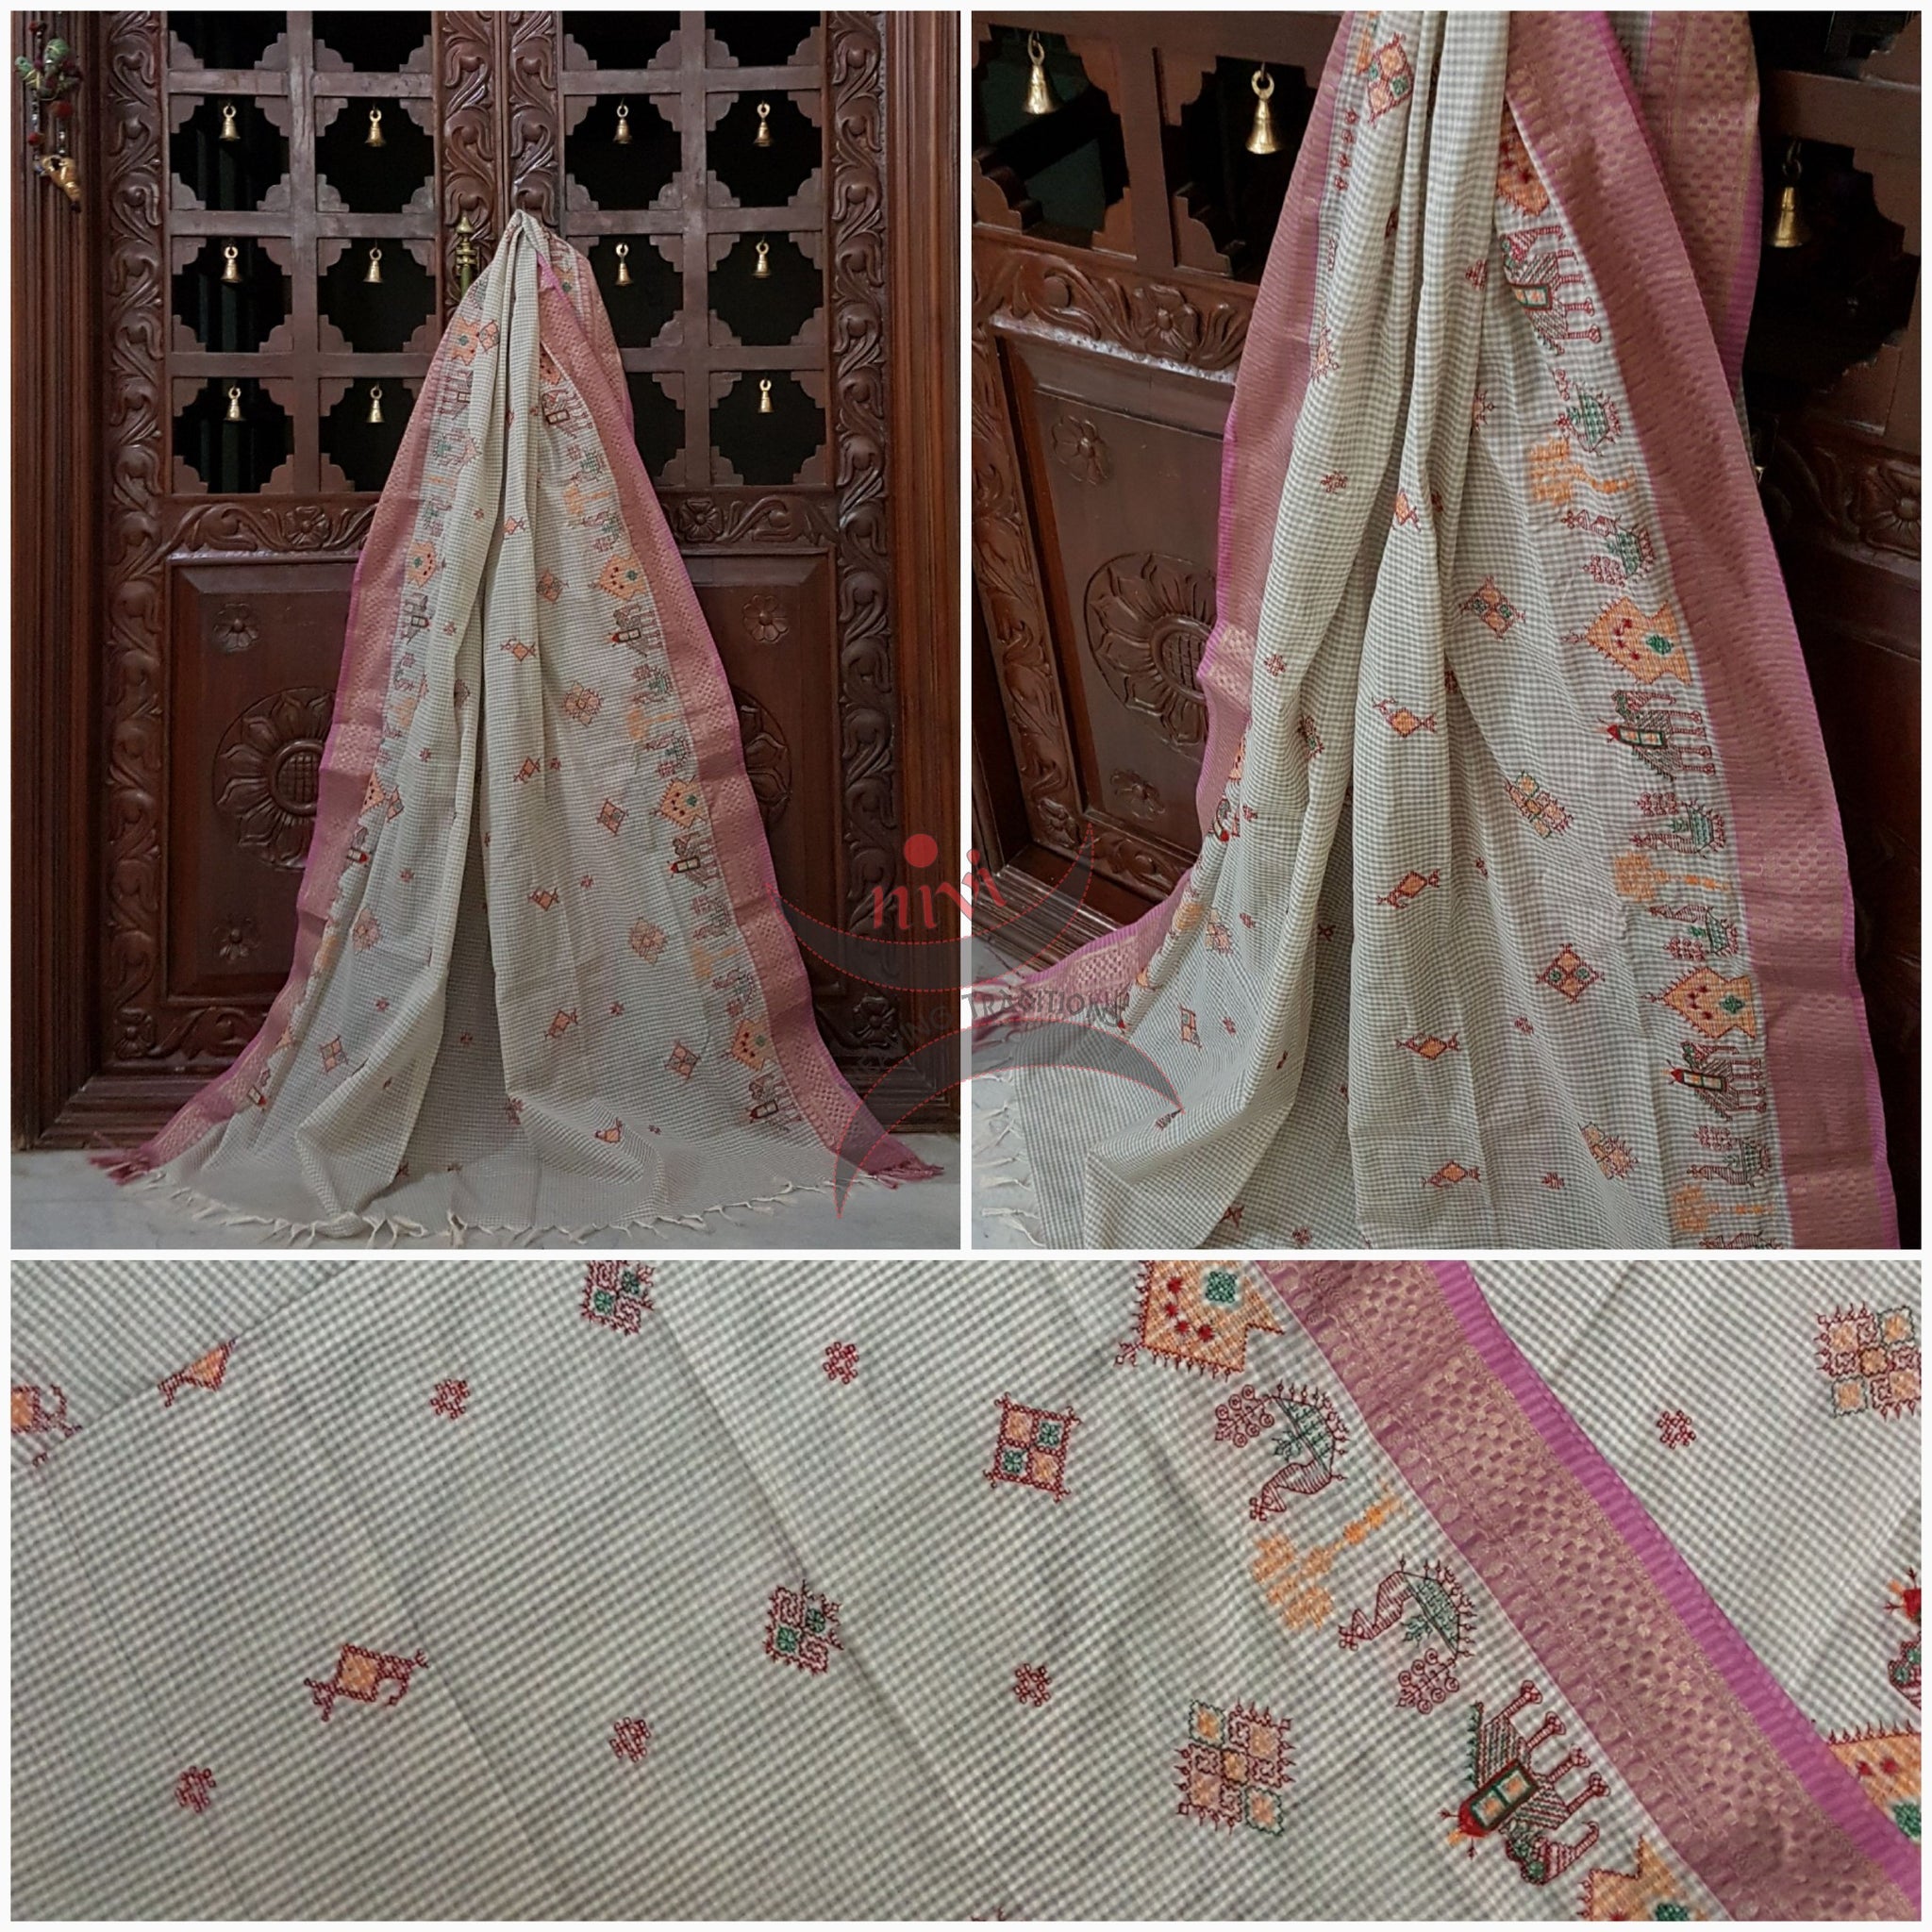 Off white with subtle grey chequered kota cotton with pink border and Kasuti embroidery with Traditional anne gopura peacock and lamp motifs.